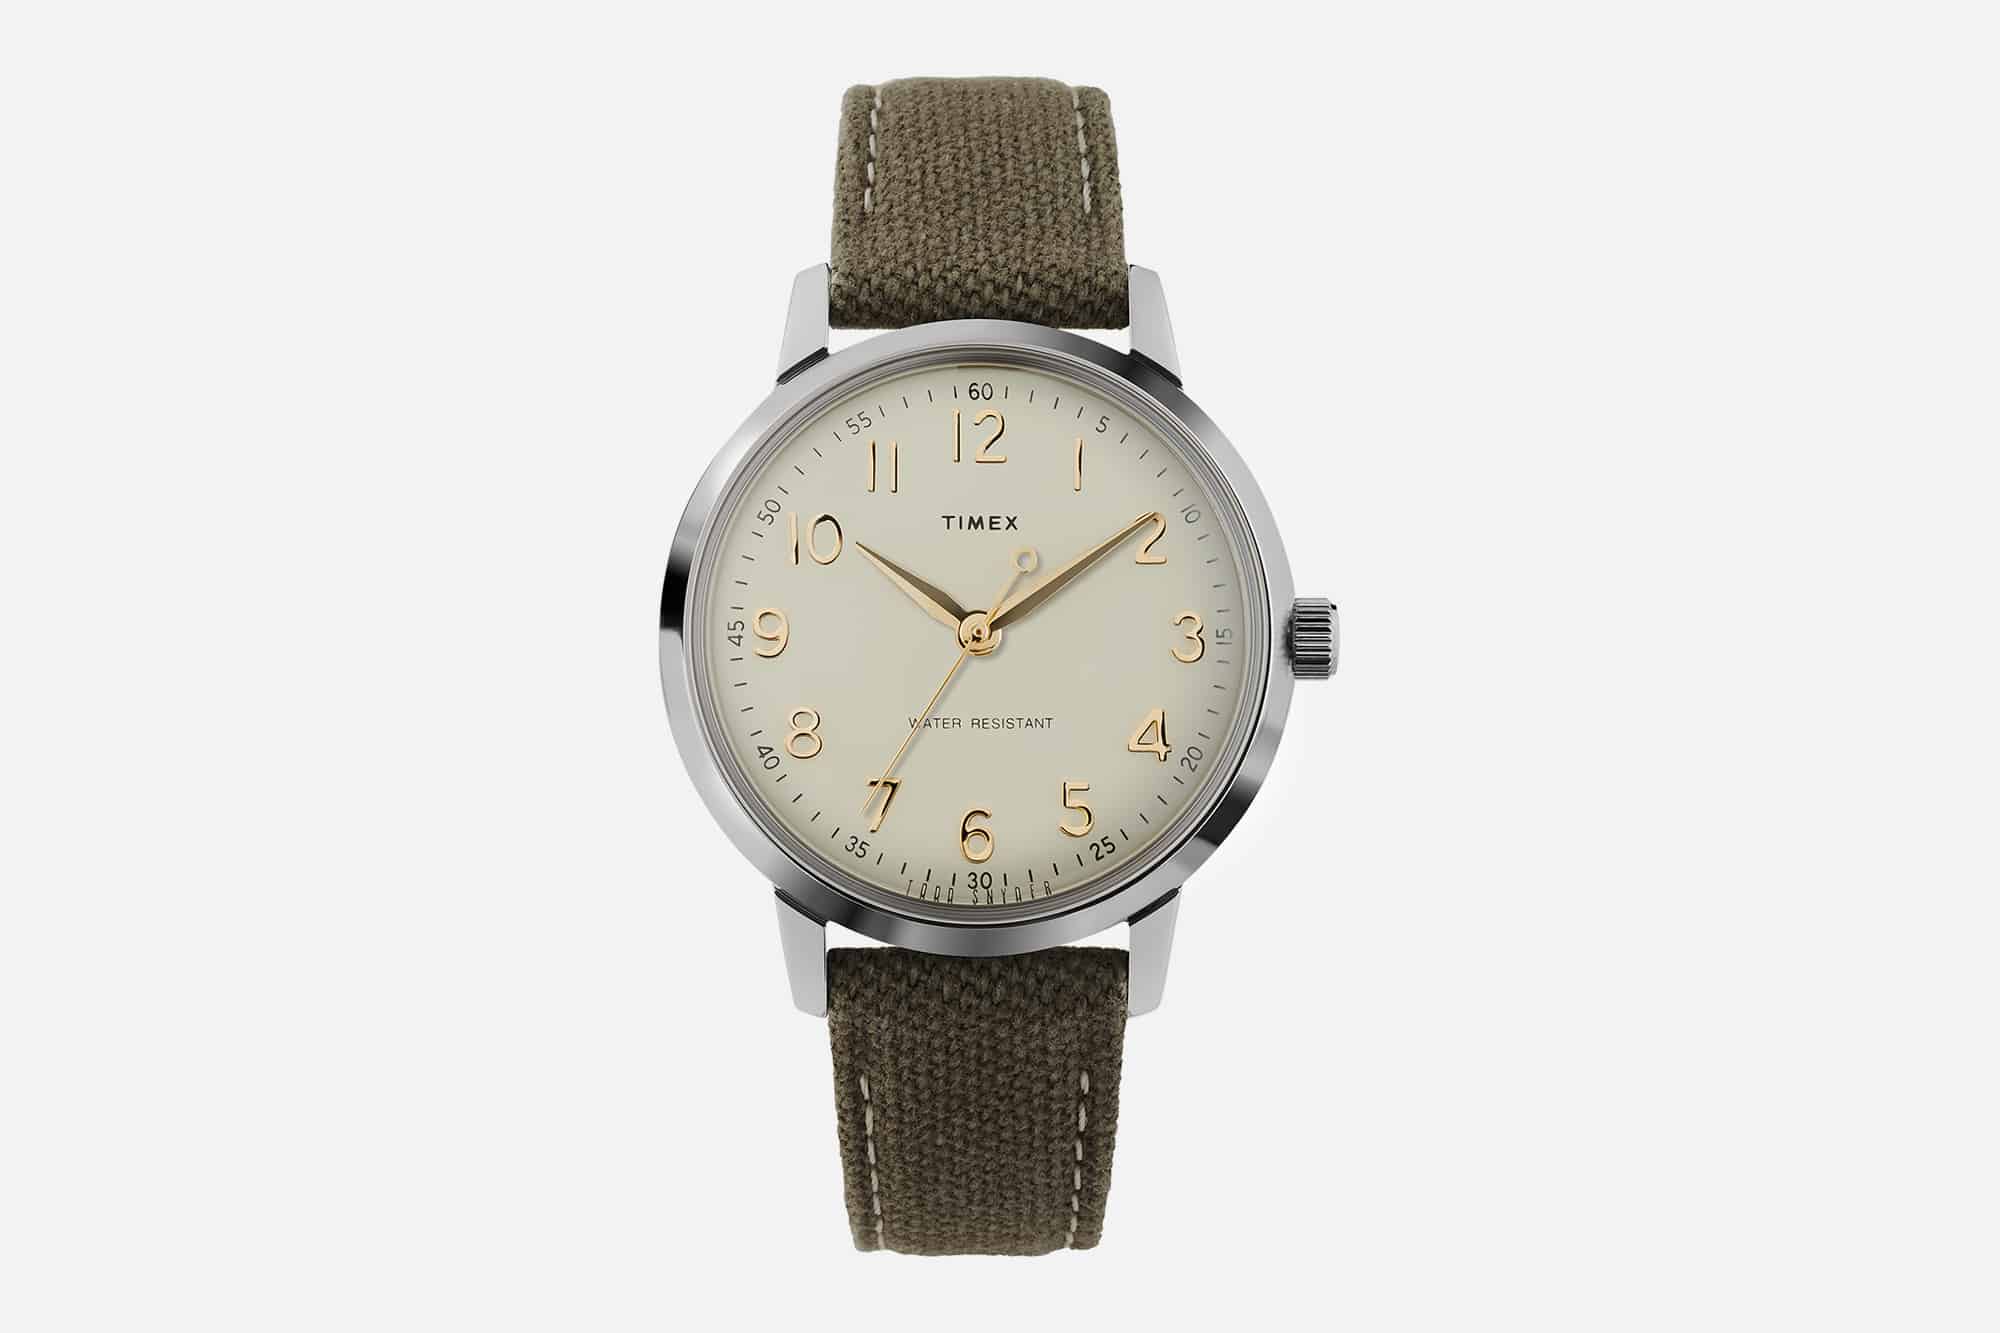 Todd Snyder and Timex Team Up Again to Celebrate the Historic 